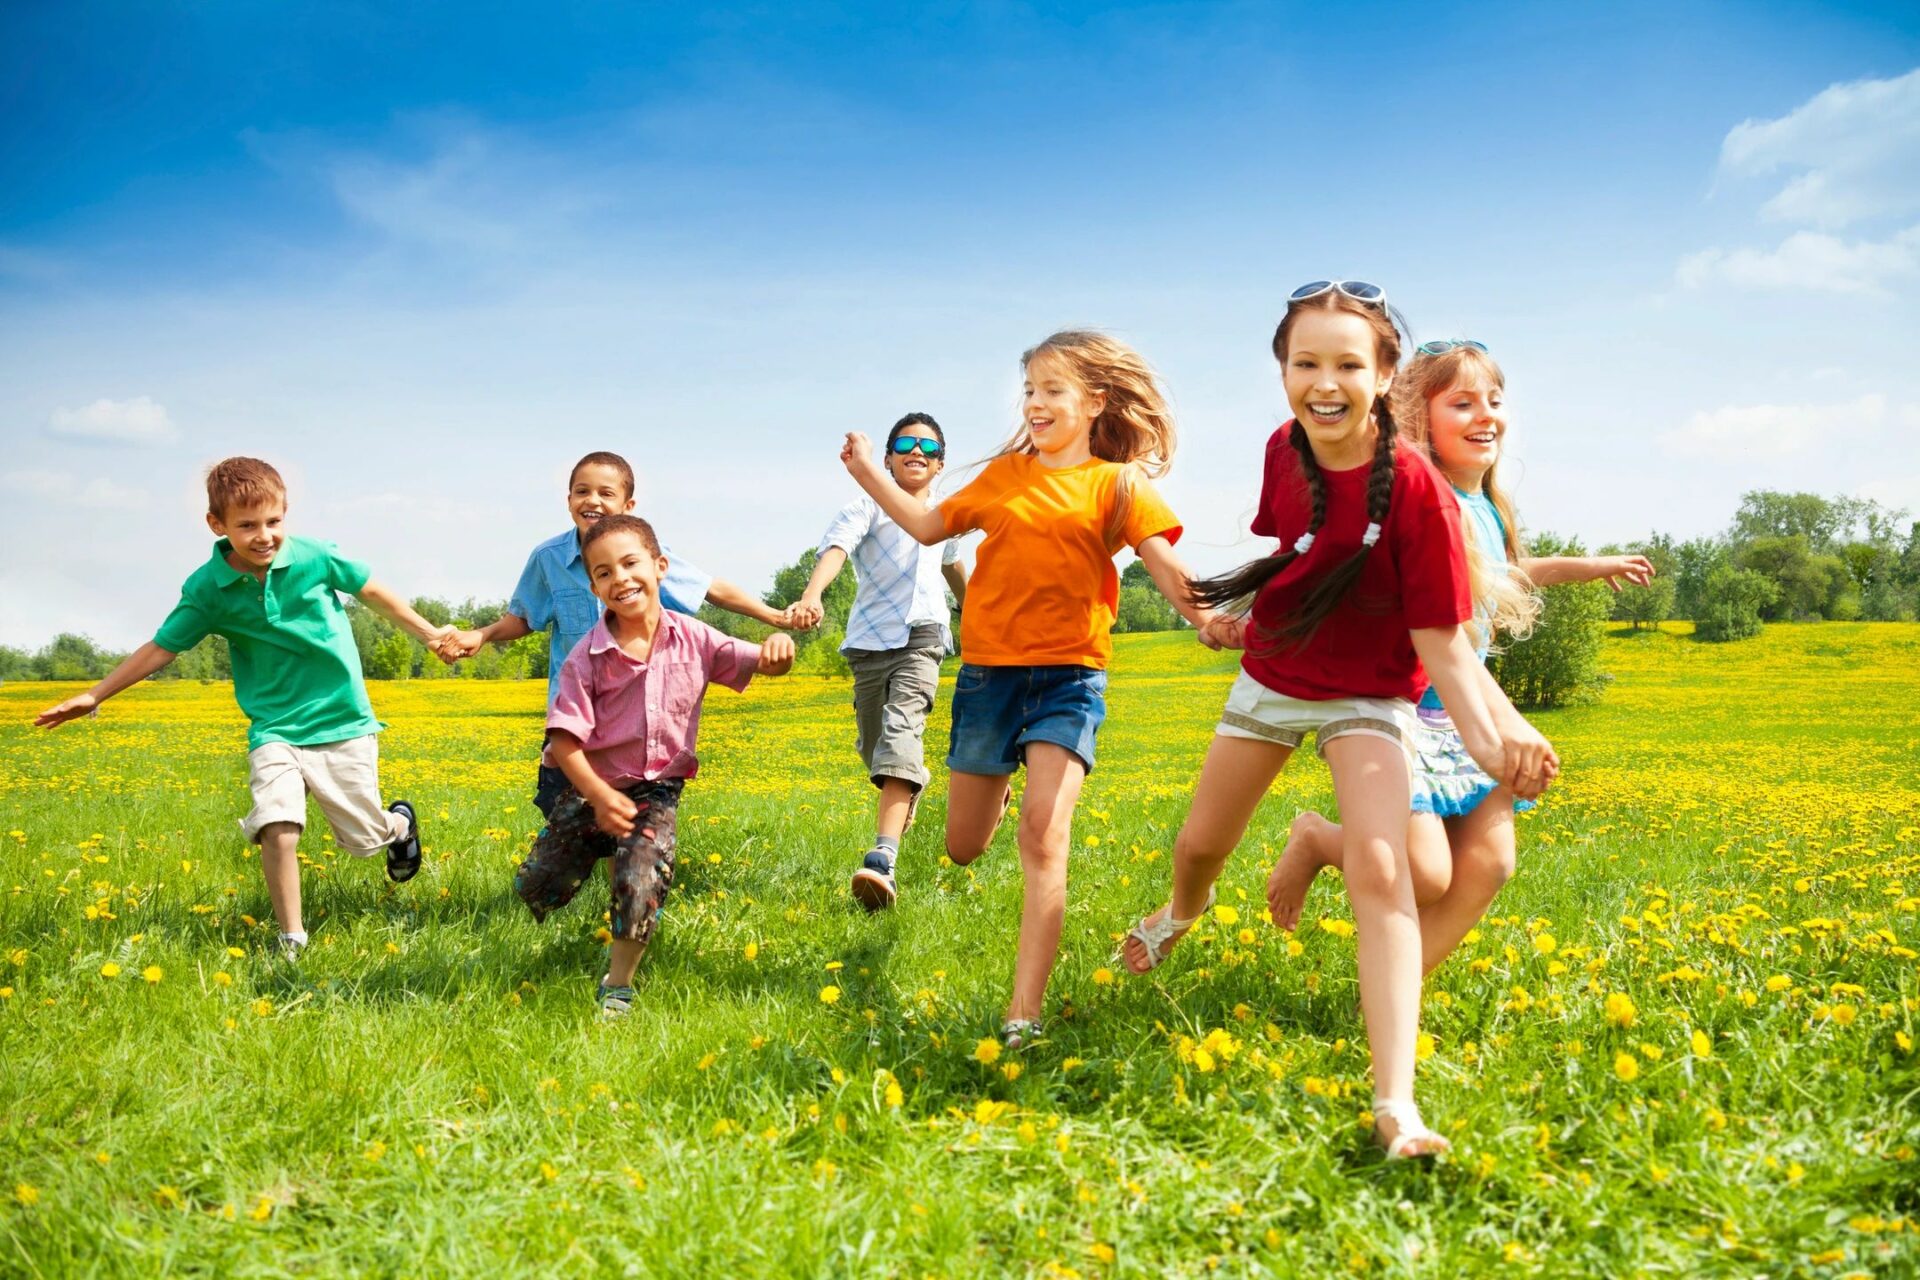 A group of children running in the grass.